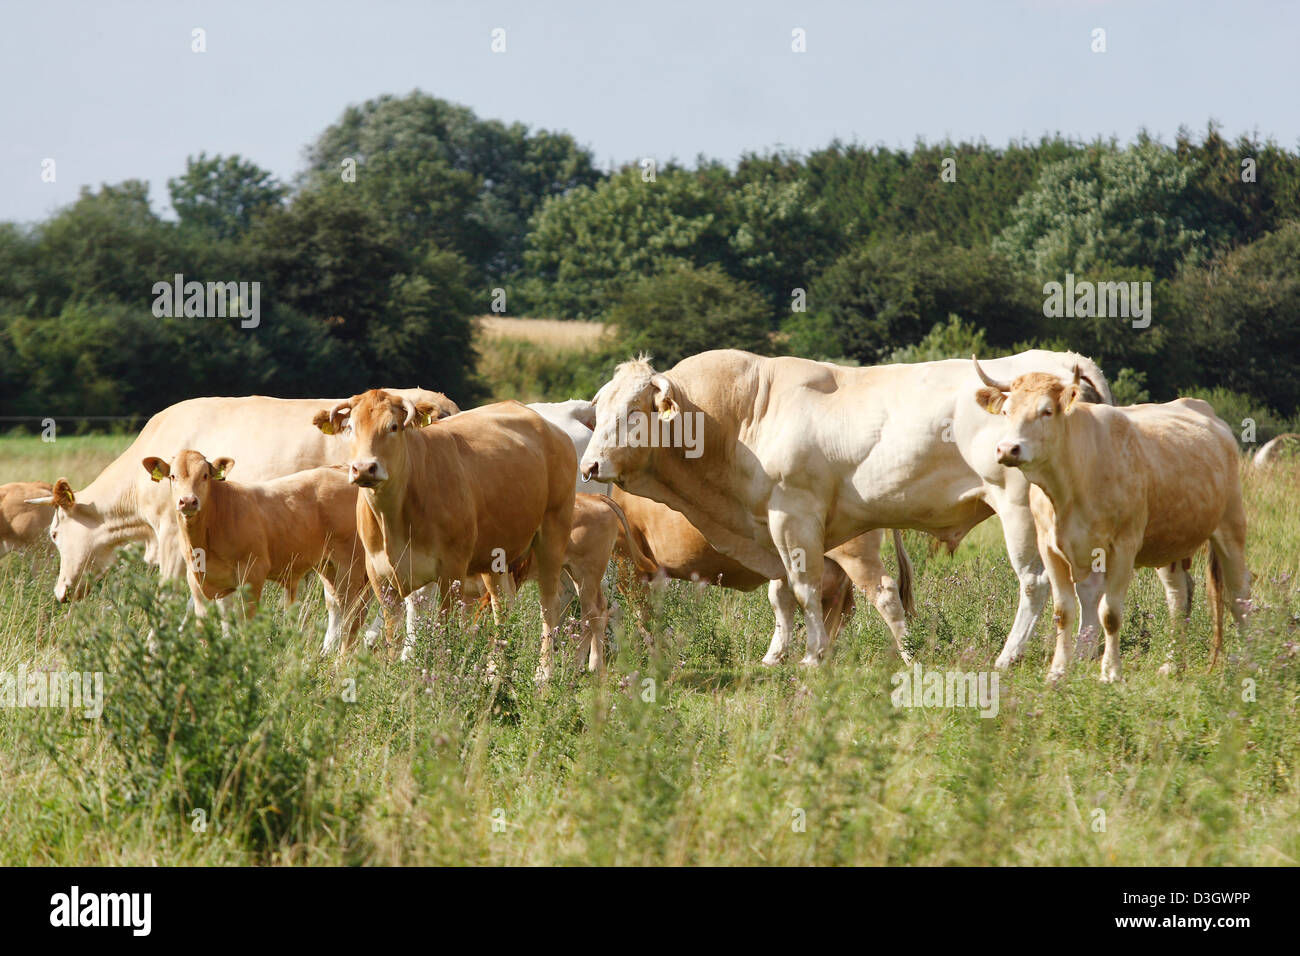 Herd of Limousin cattle Bos primigenius taurus on meadow, Lower Saxony, Germany Stock Photo